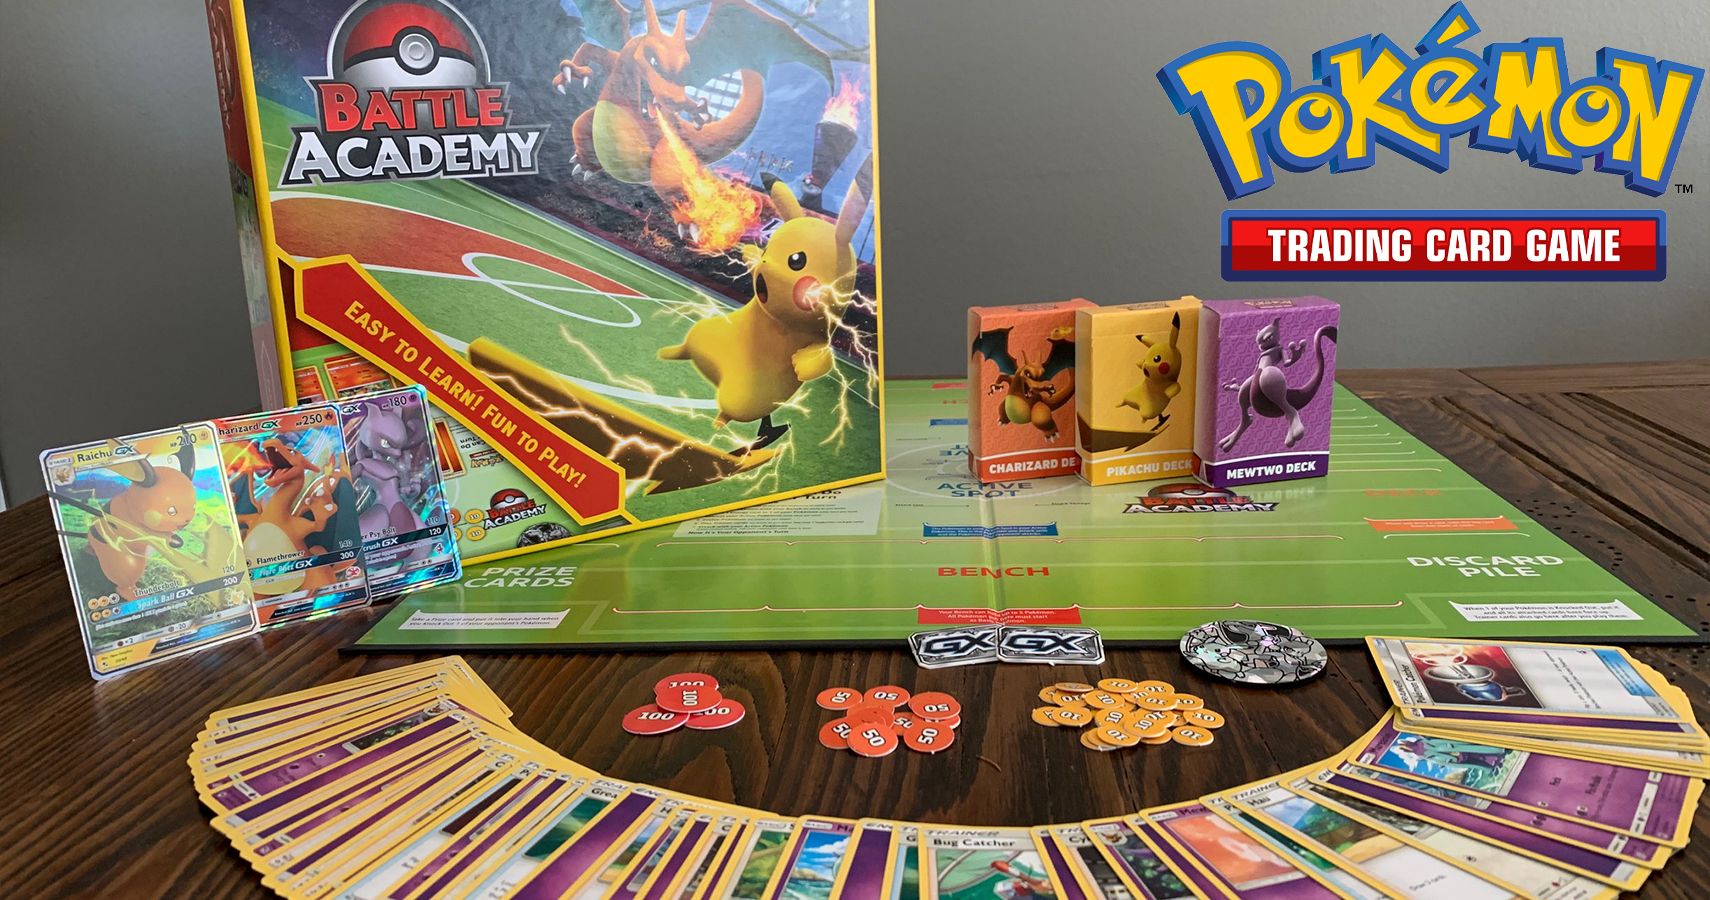 Pokémon Trading Card Game Live Release Date Pokemon: Battle Academy Review